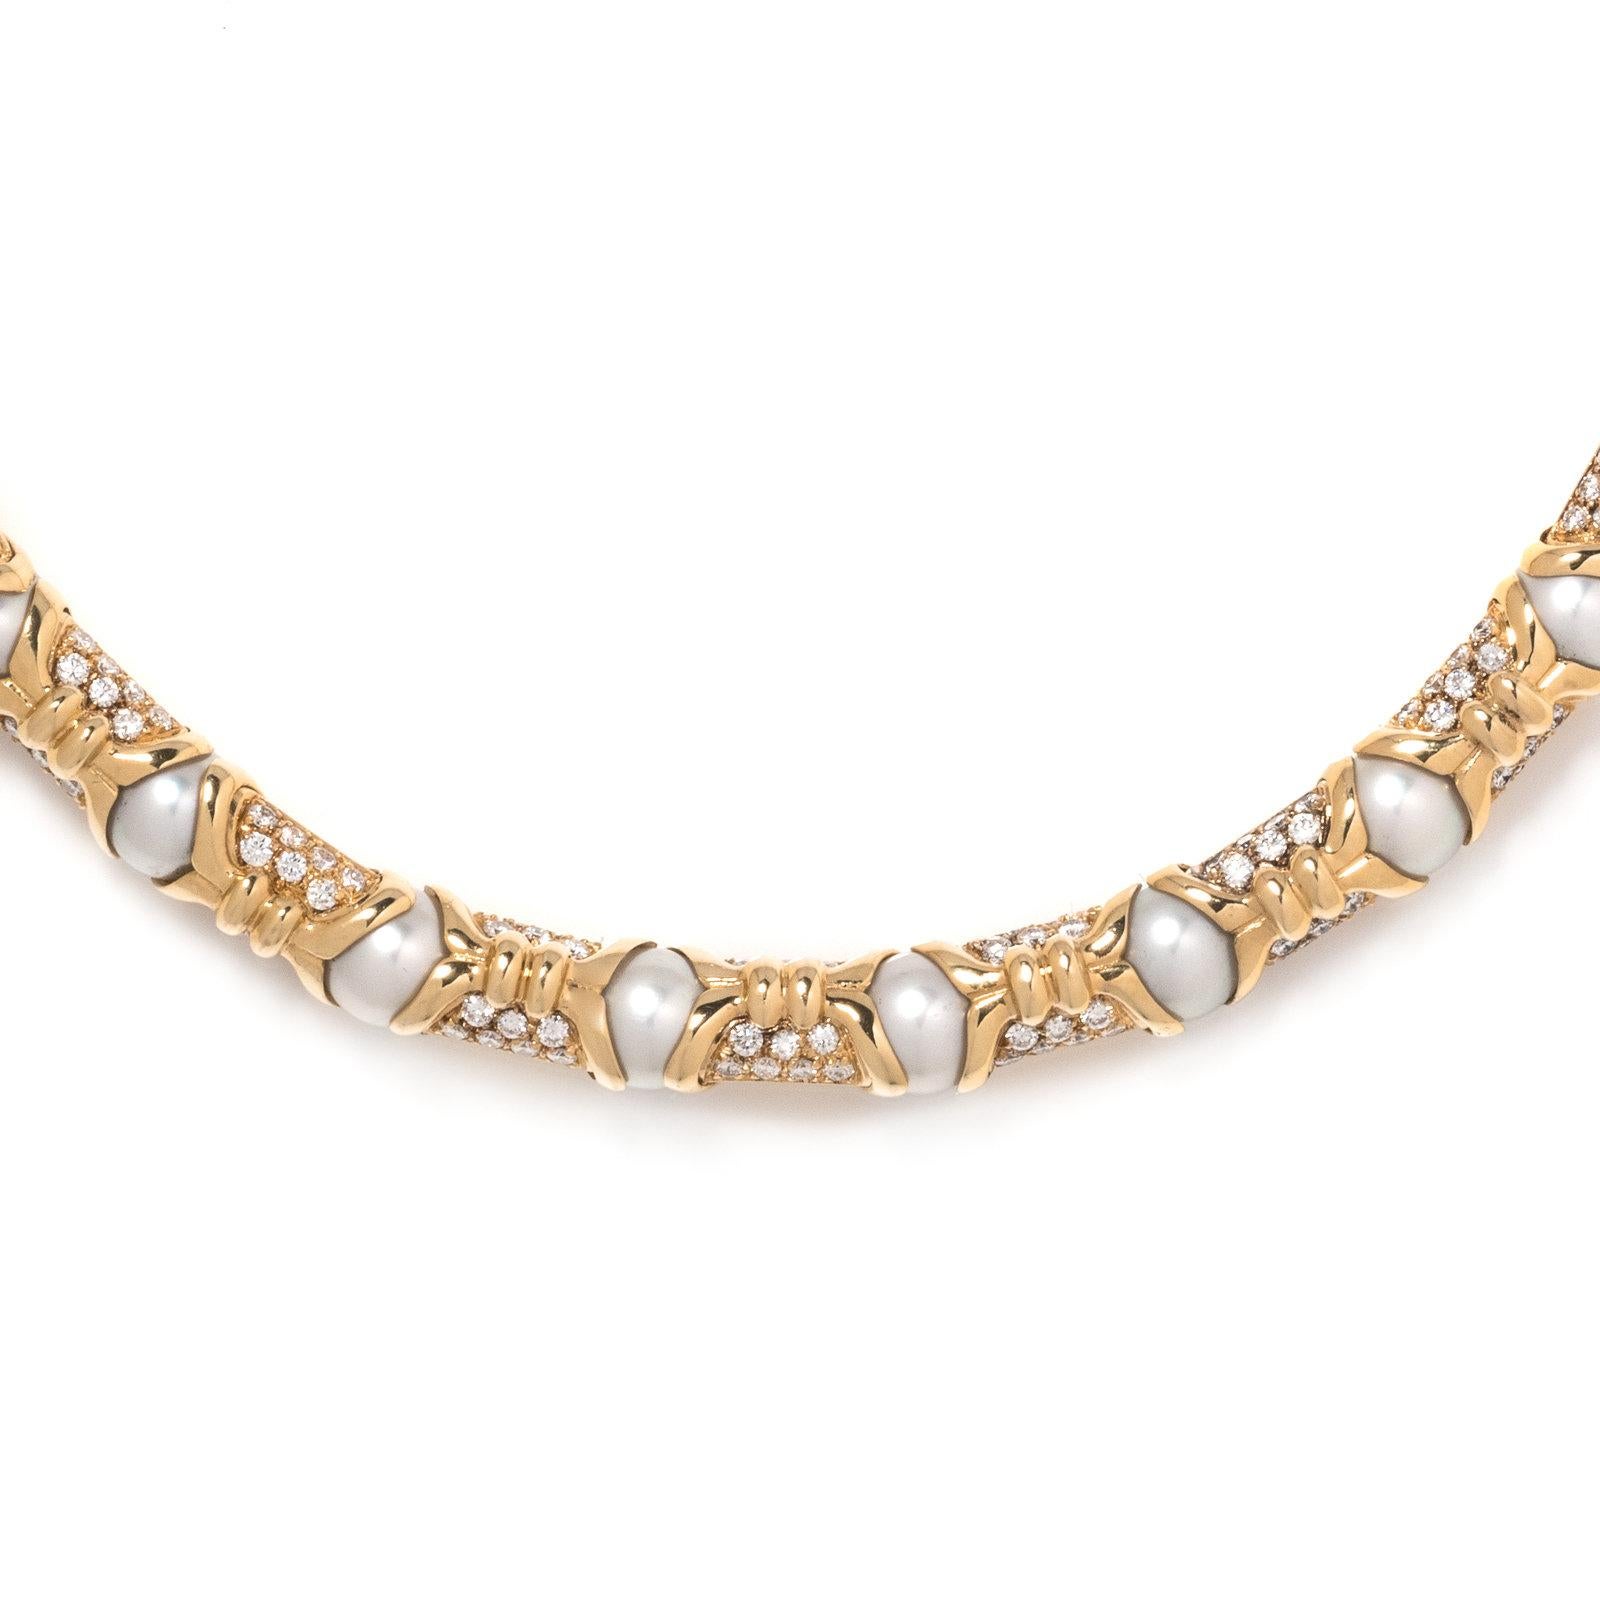 In a semi-flexible link design, containing 26 cultured pearls and numerous round brilliant cut diamonds weighing approximately 7.50 carats total. 16 inches long. 107 Grams
Stamp: BVLGARI 750 (Italian hallmark)
Accompanied by a Bvlgari inner fold and